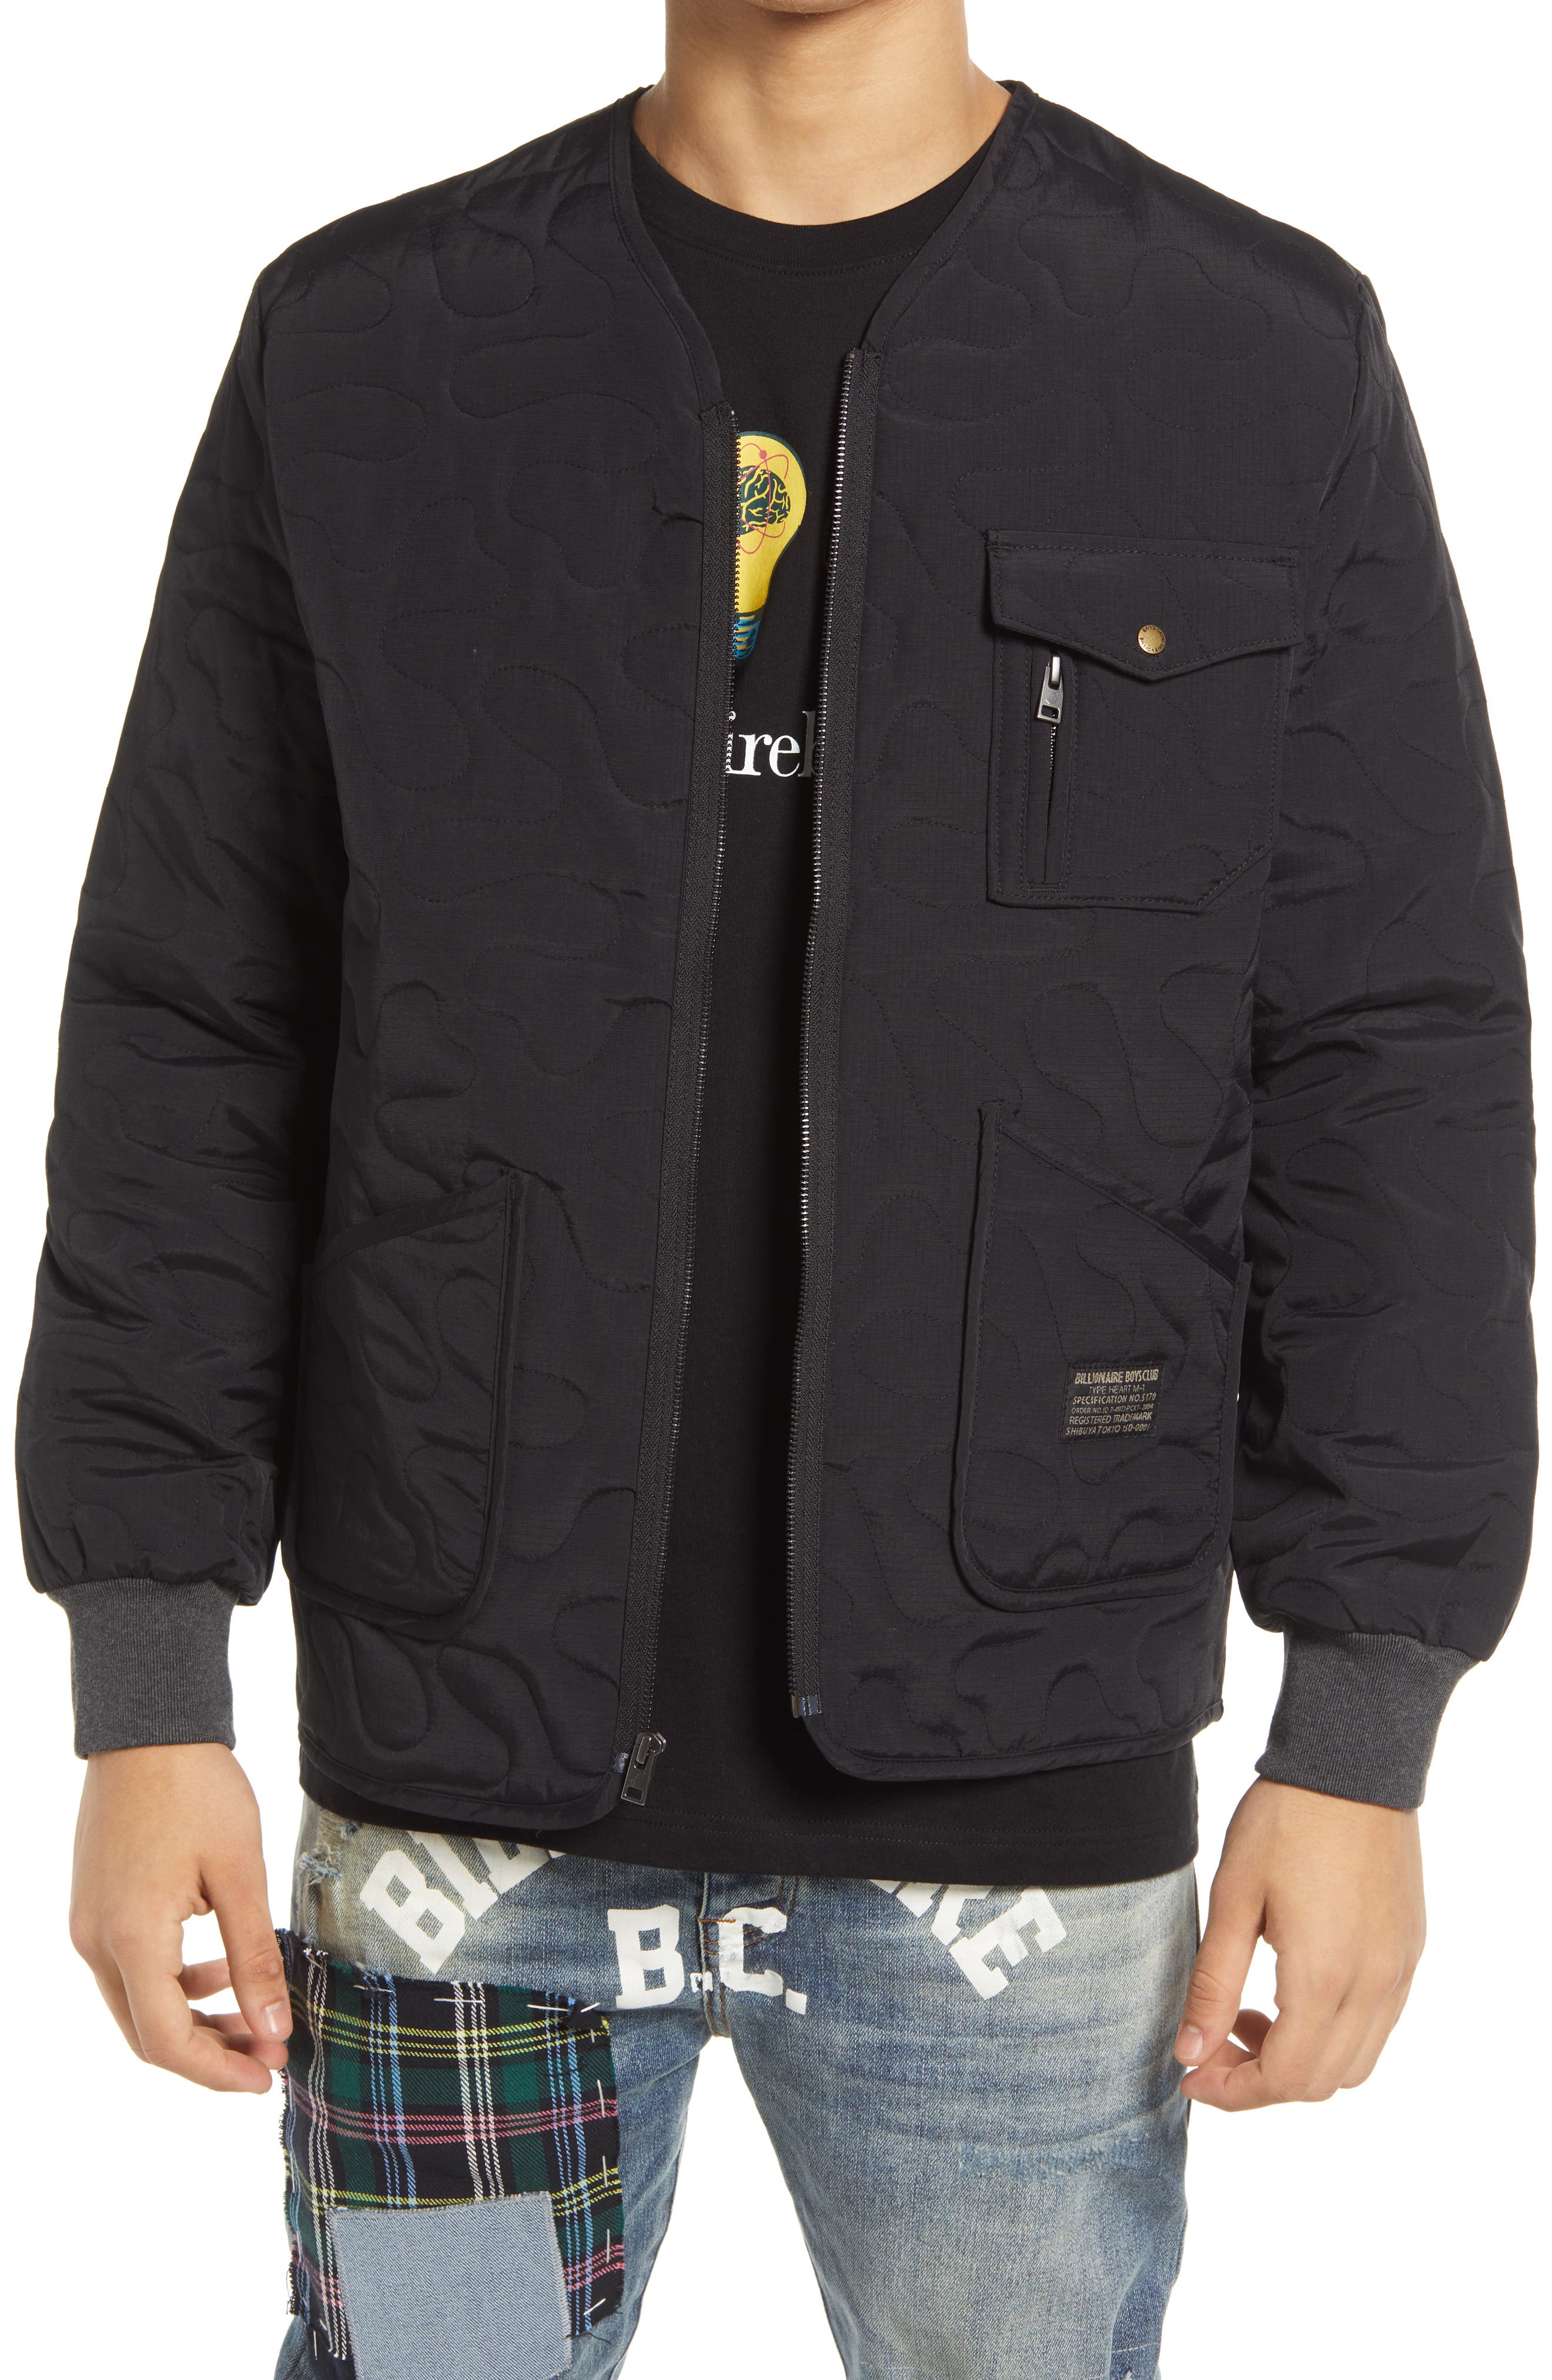 Billionaire Boys Club BB Utility Jacket in Black at Nordstrom, Size Small